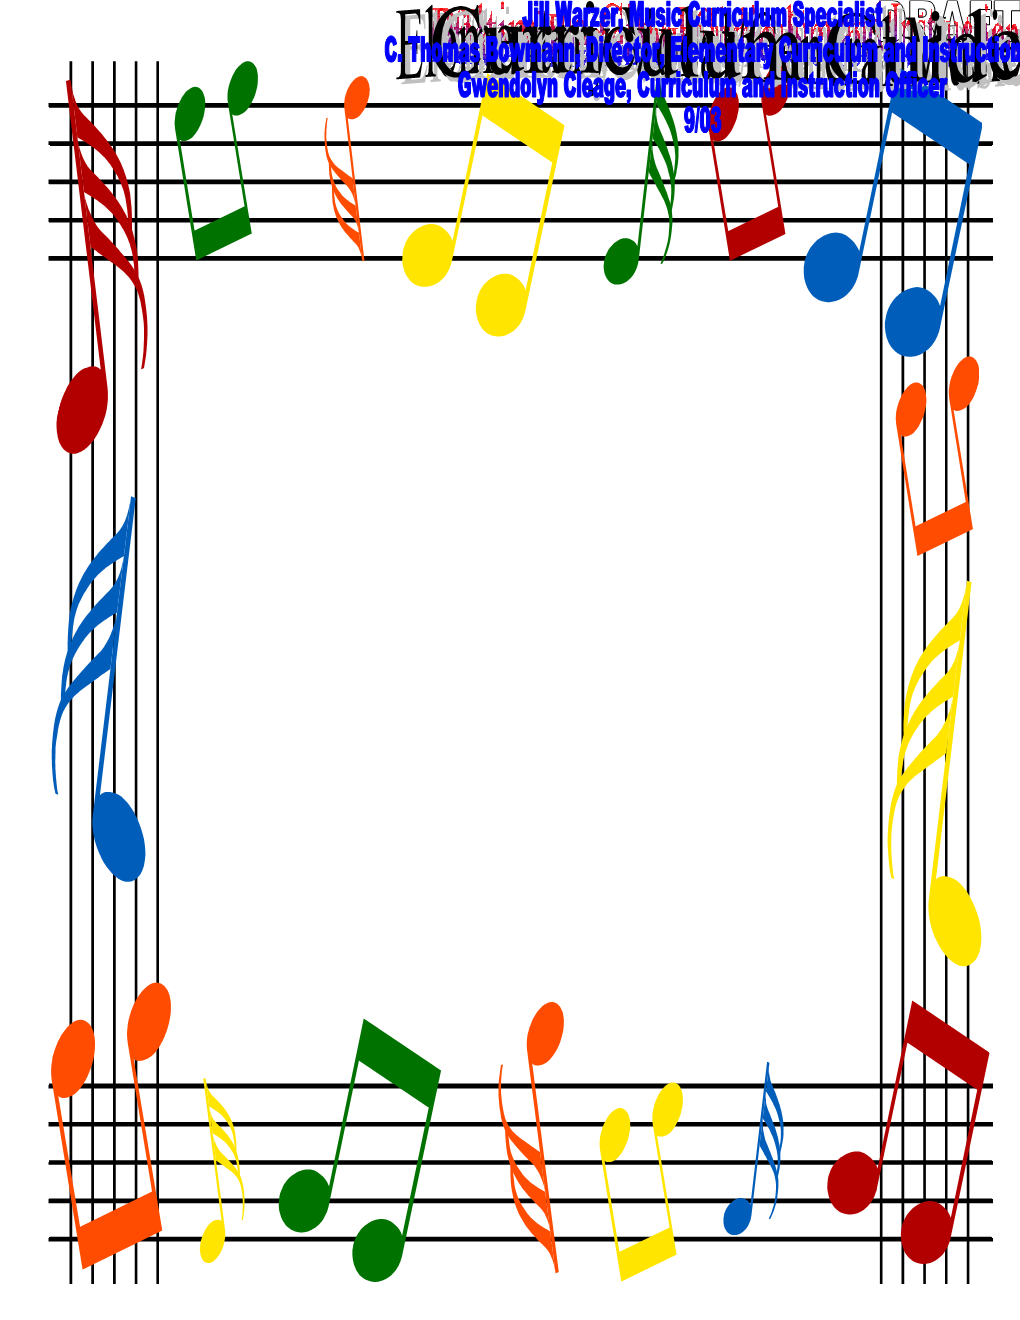 Maryland Essential Learner Outcomes for Elementary Music